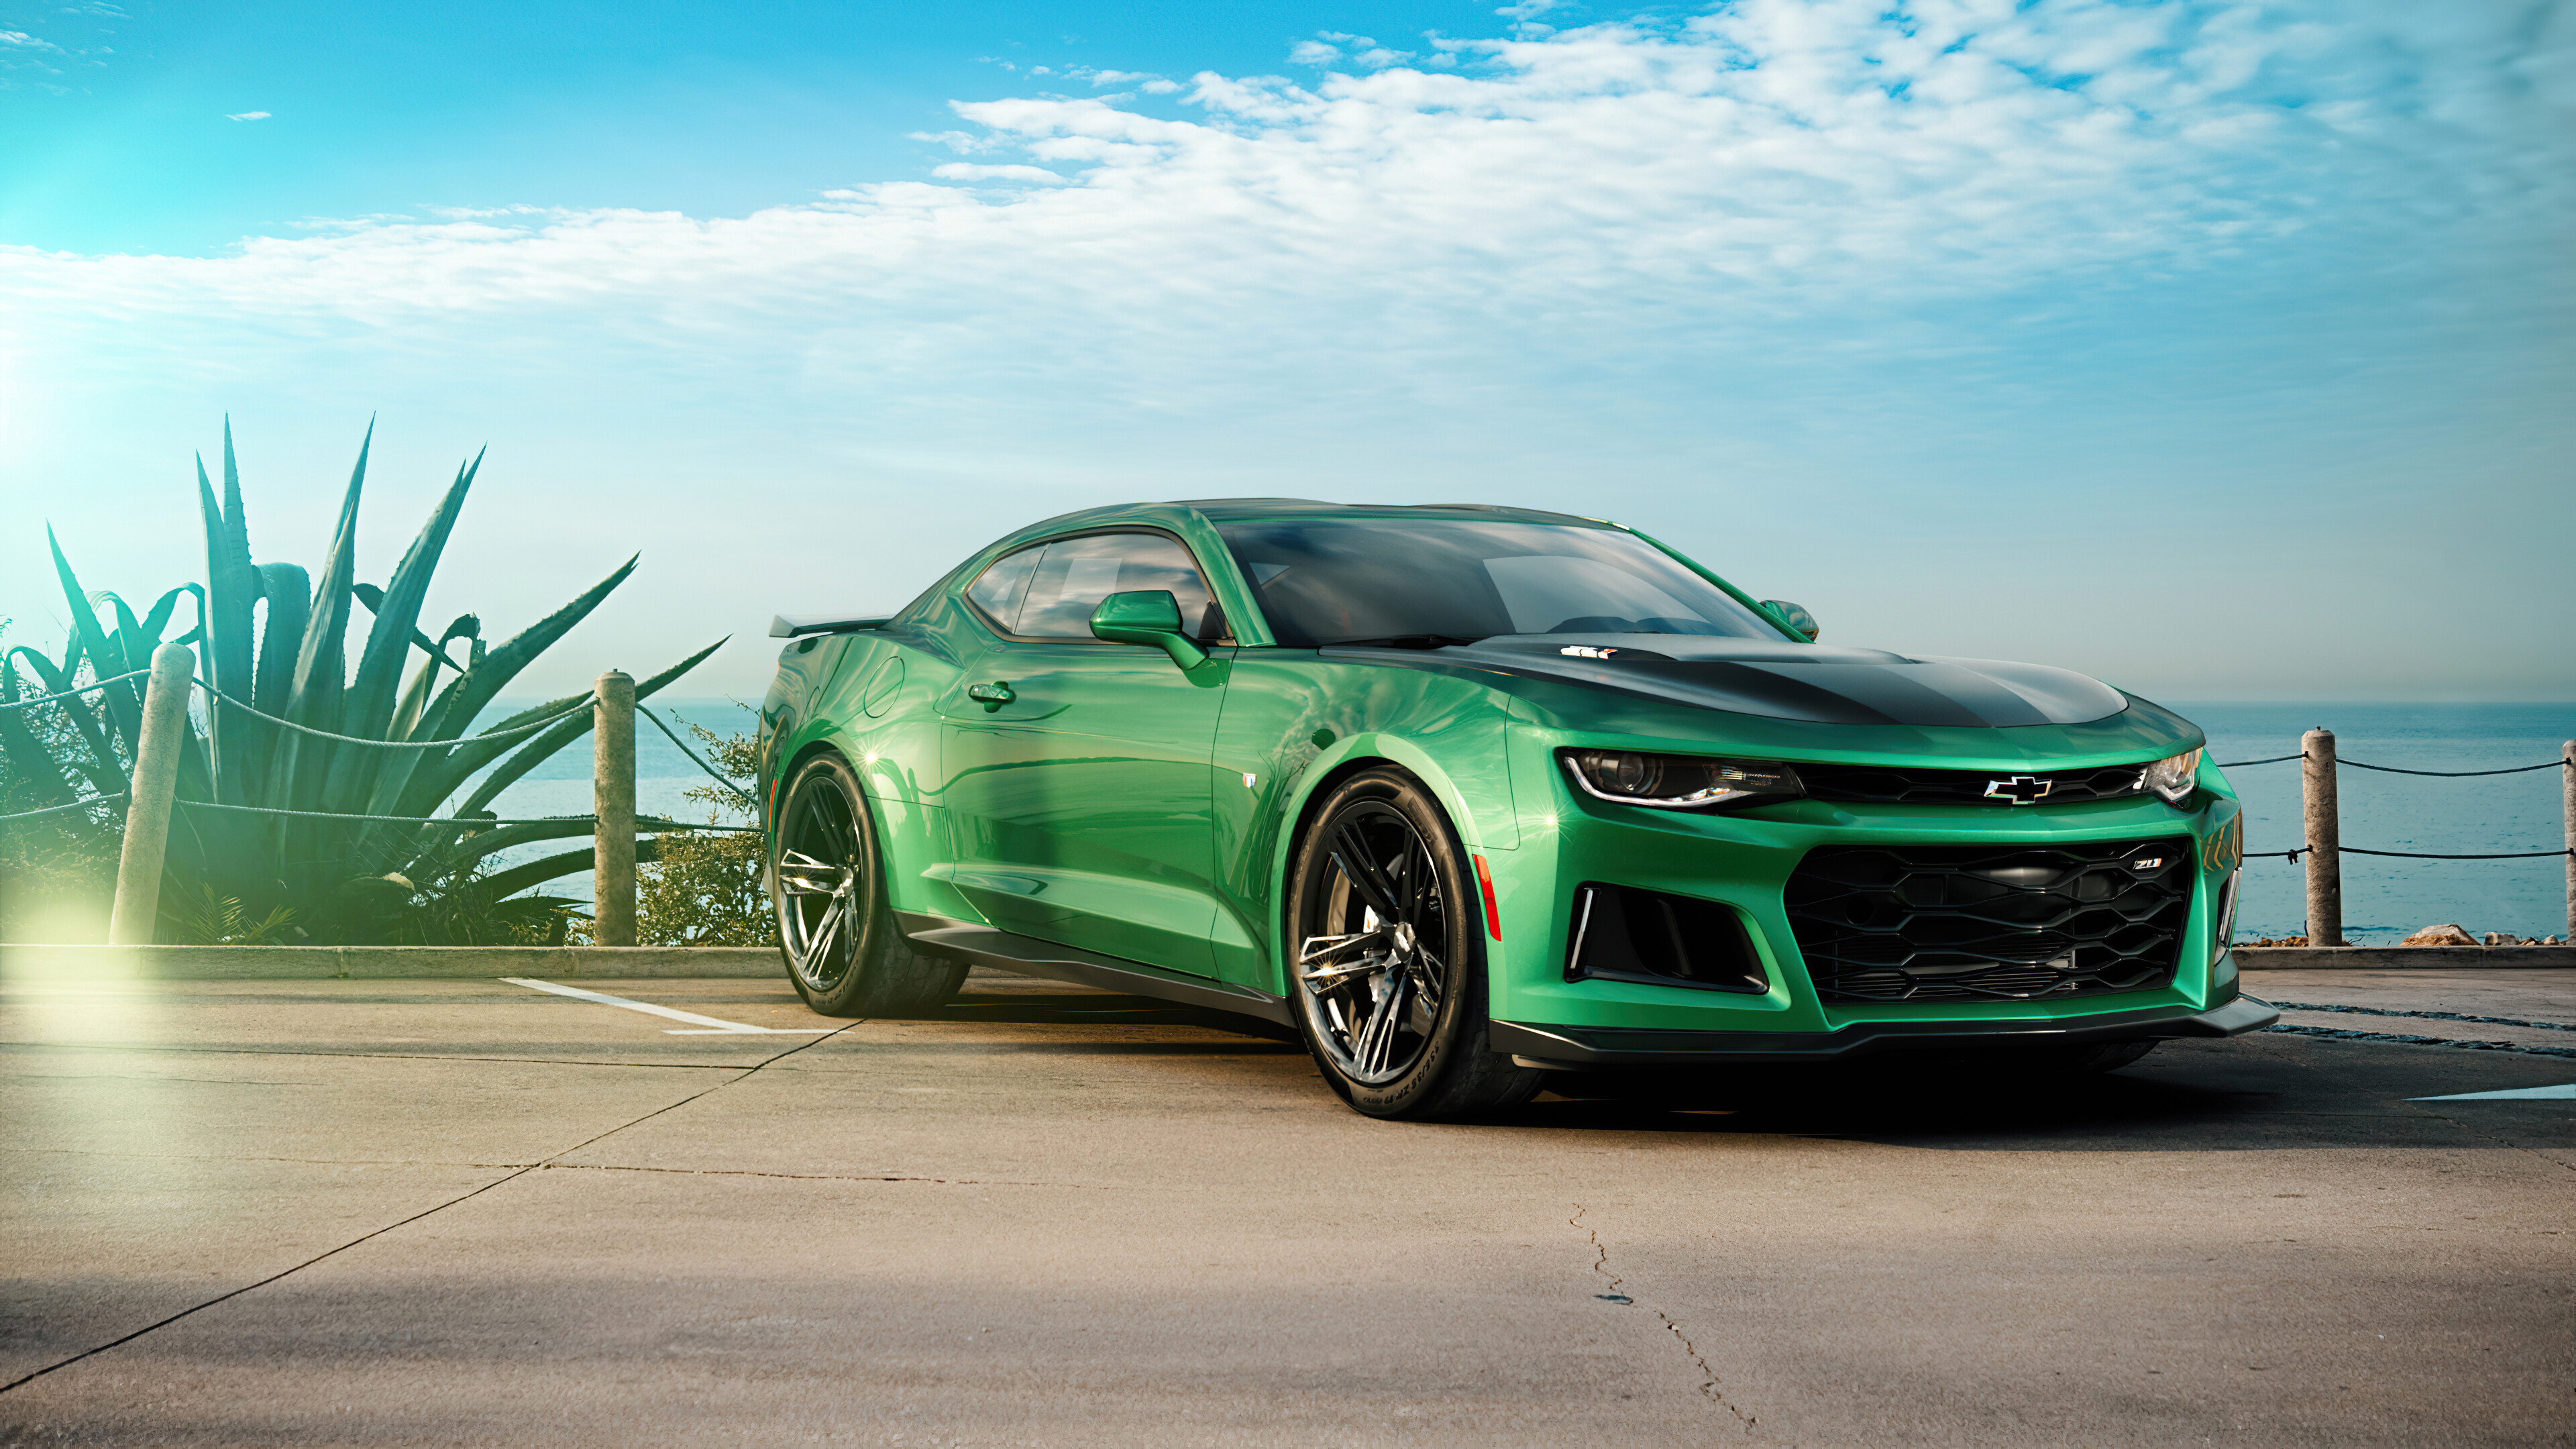 Chevrolet: The sixth generation Camaro sales began in late 2015 and offered in LT and SS models built on the GM Alpha platform at Lansing Grand River Assembly in Michigan. 3840x2160 4K Background.